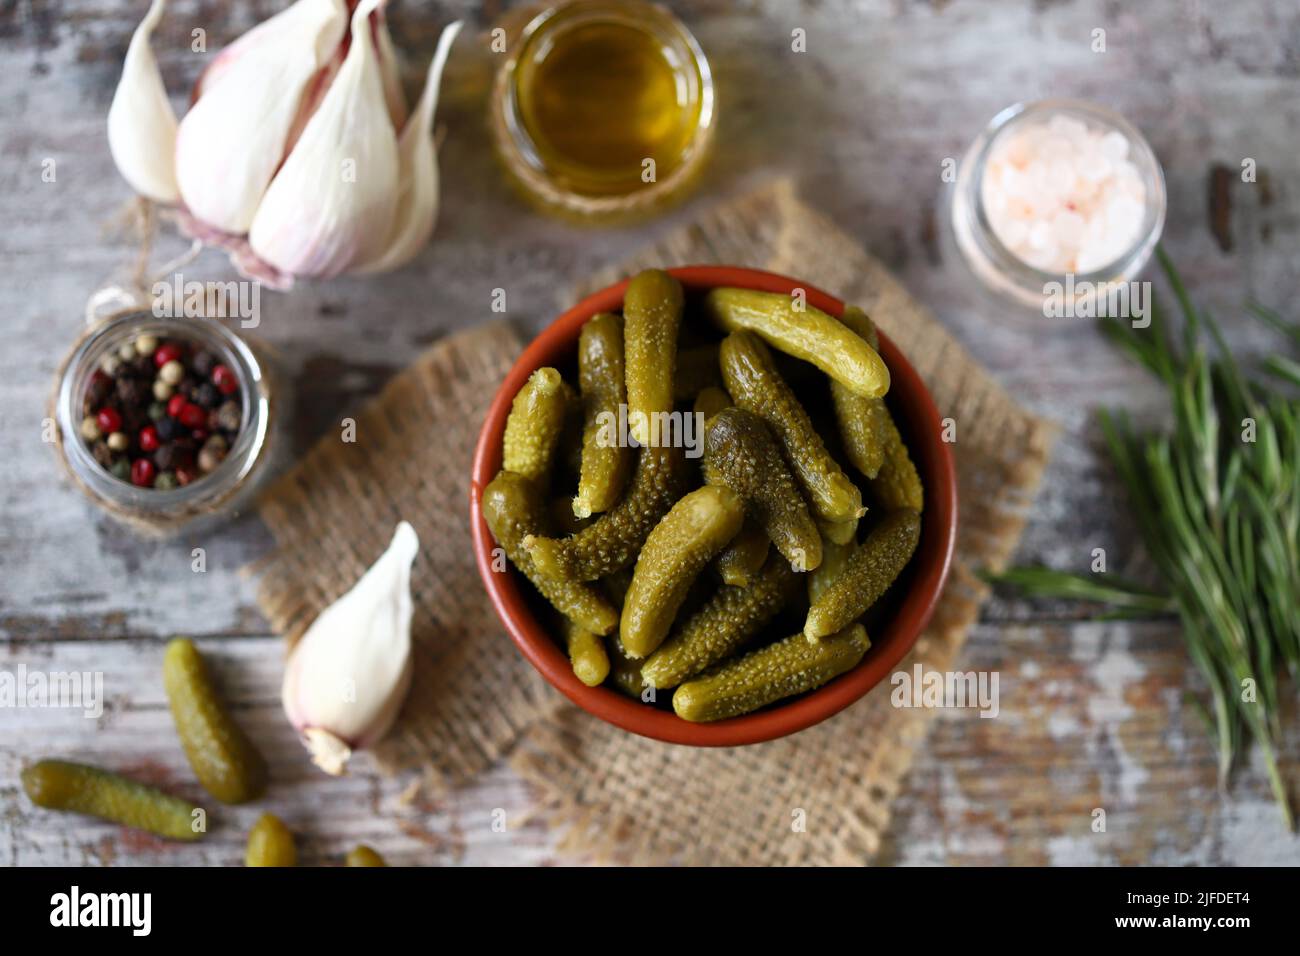 Gherkins. Mini gherkins in a bowl. Pickles. Condiments and spices. Stock Photo